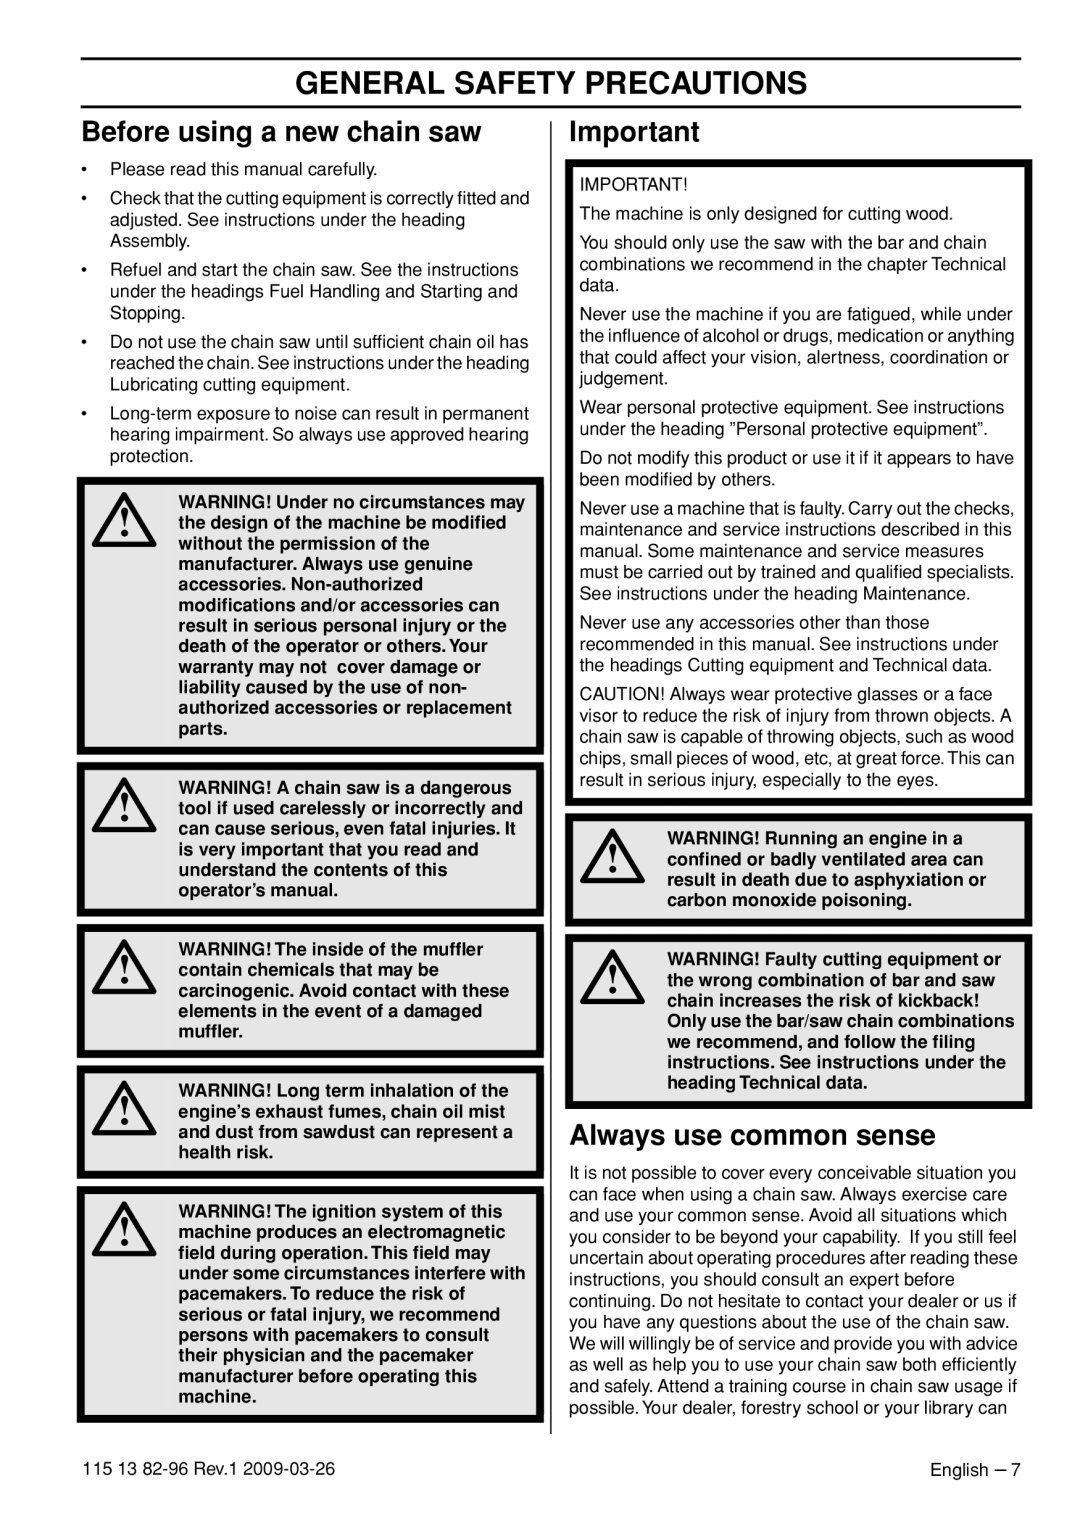 Husqvarna 115 13 82-96, 460 Rancher manual General Safety Precautions, Before using a new chain saw, Always use common sense 